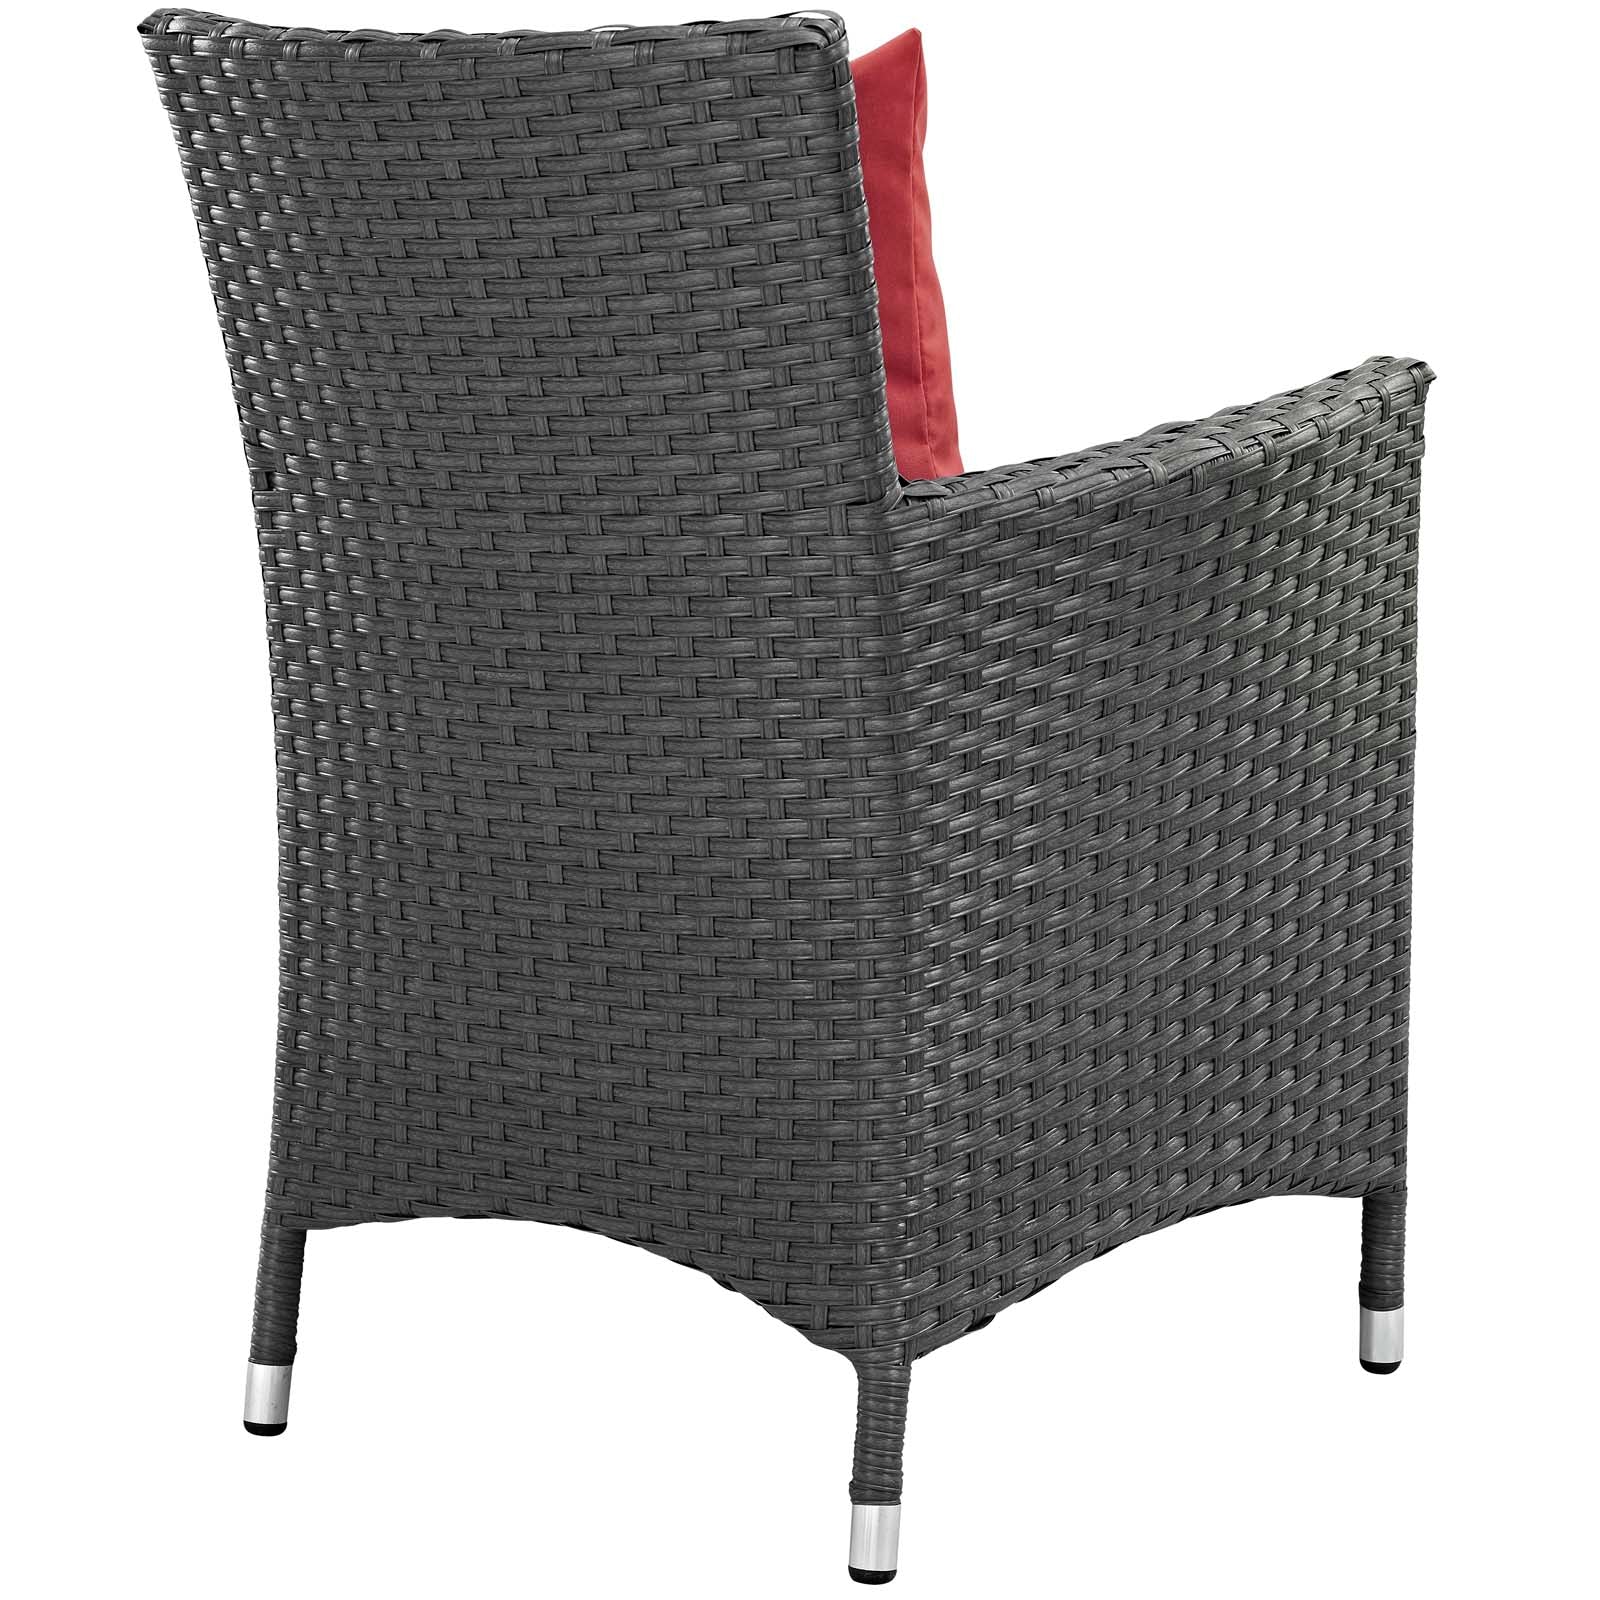 Modway Outdoor Dining Chairs - Sojourn Dining Outdoor Patio Sunbrella Armchair Canvas Red